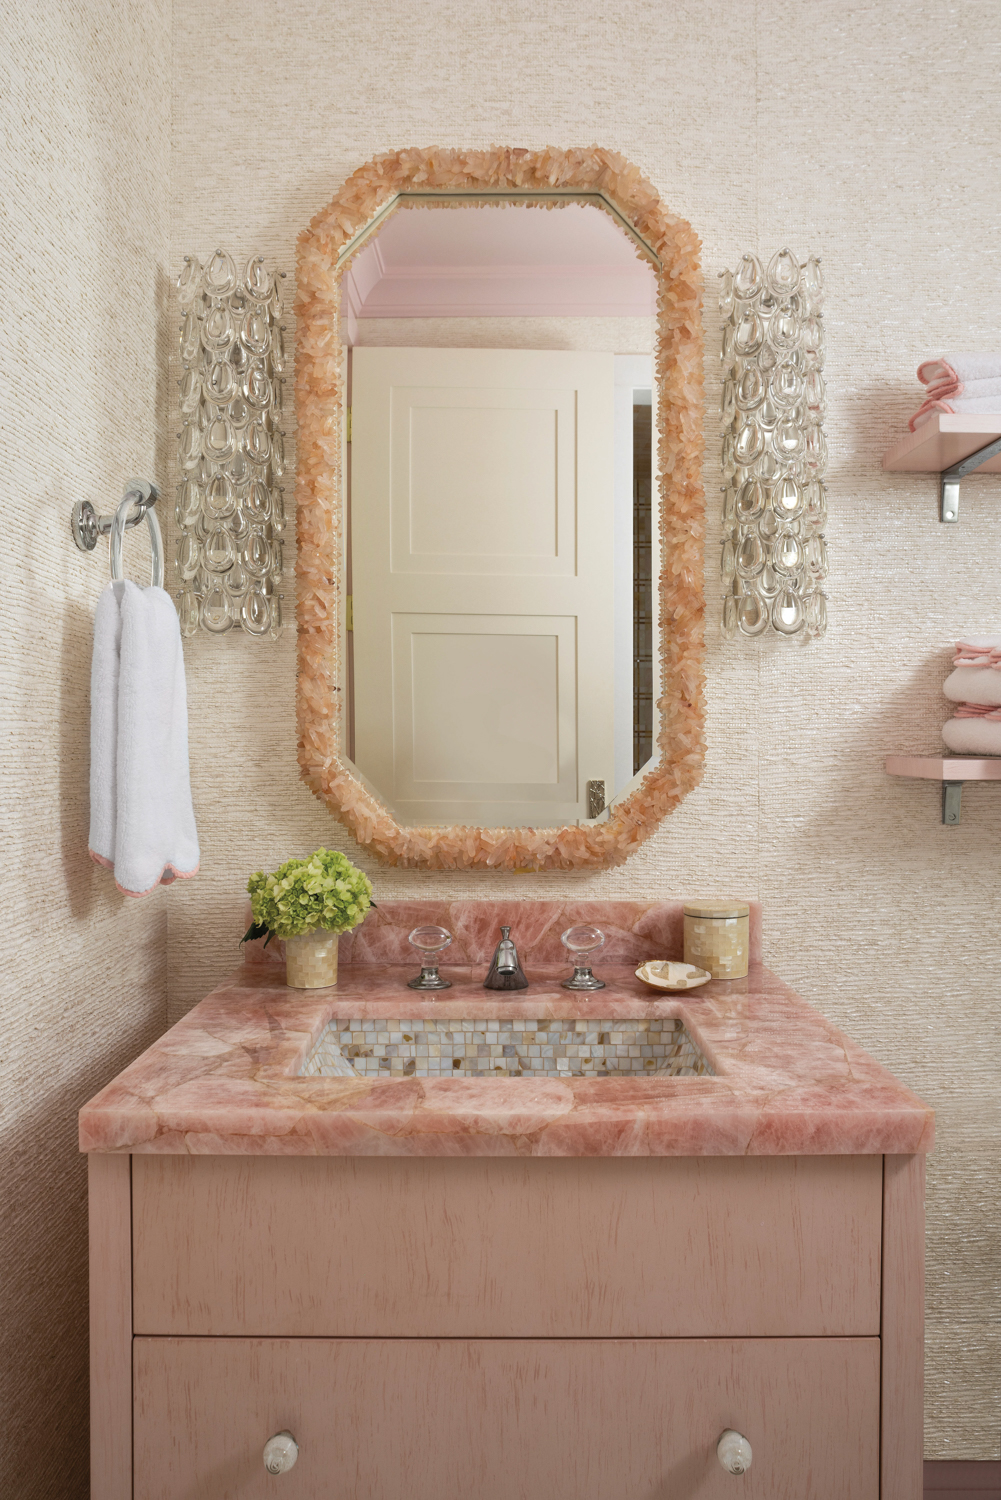 Bathroom vanity with pink countertops, peach mirror and crystal sconces